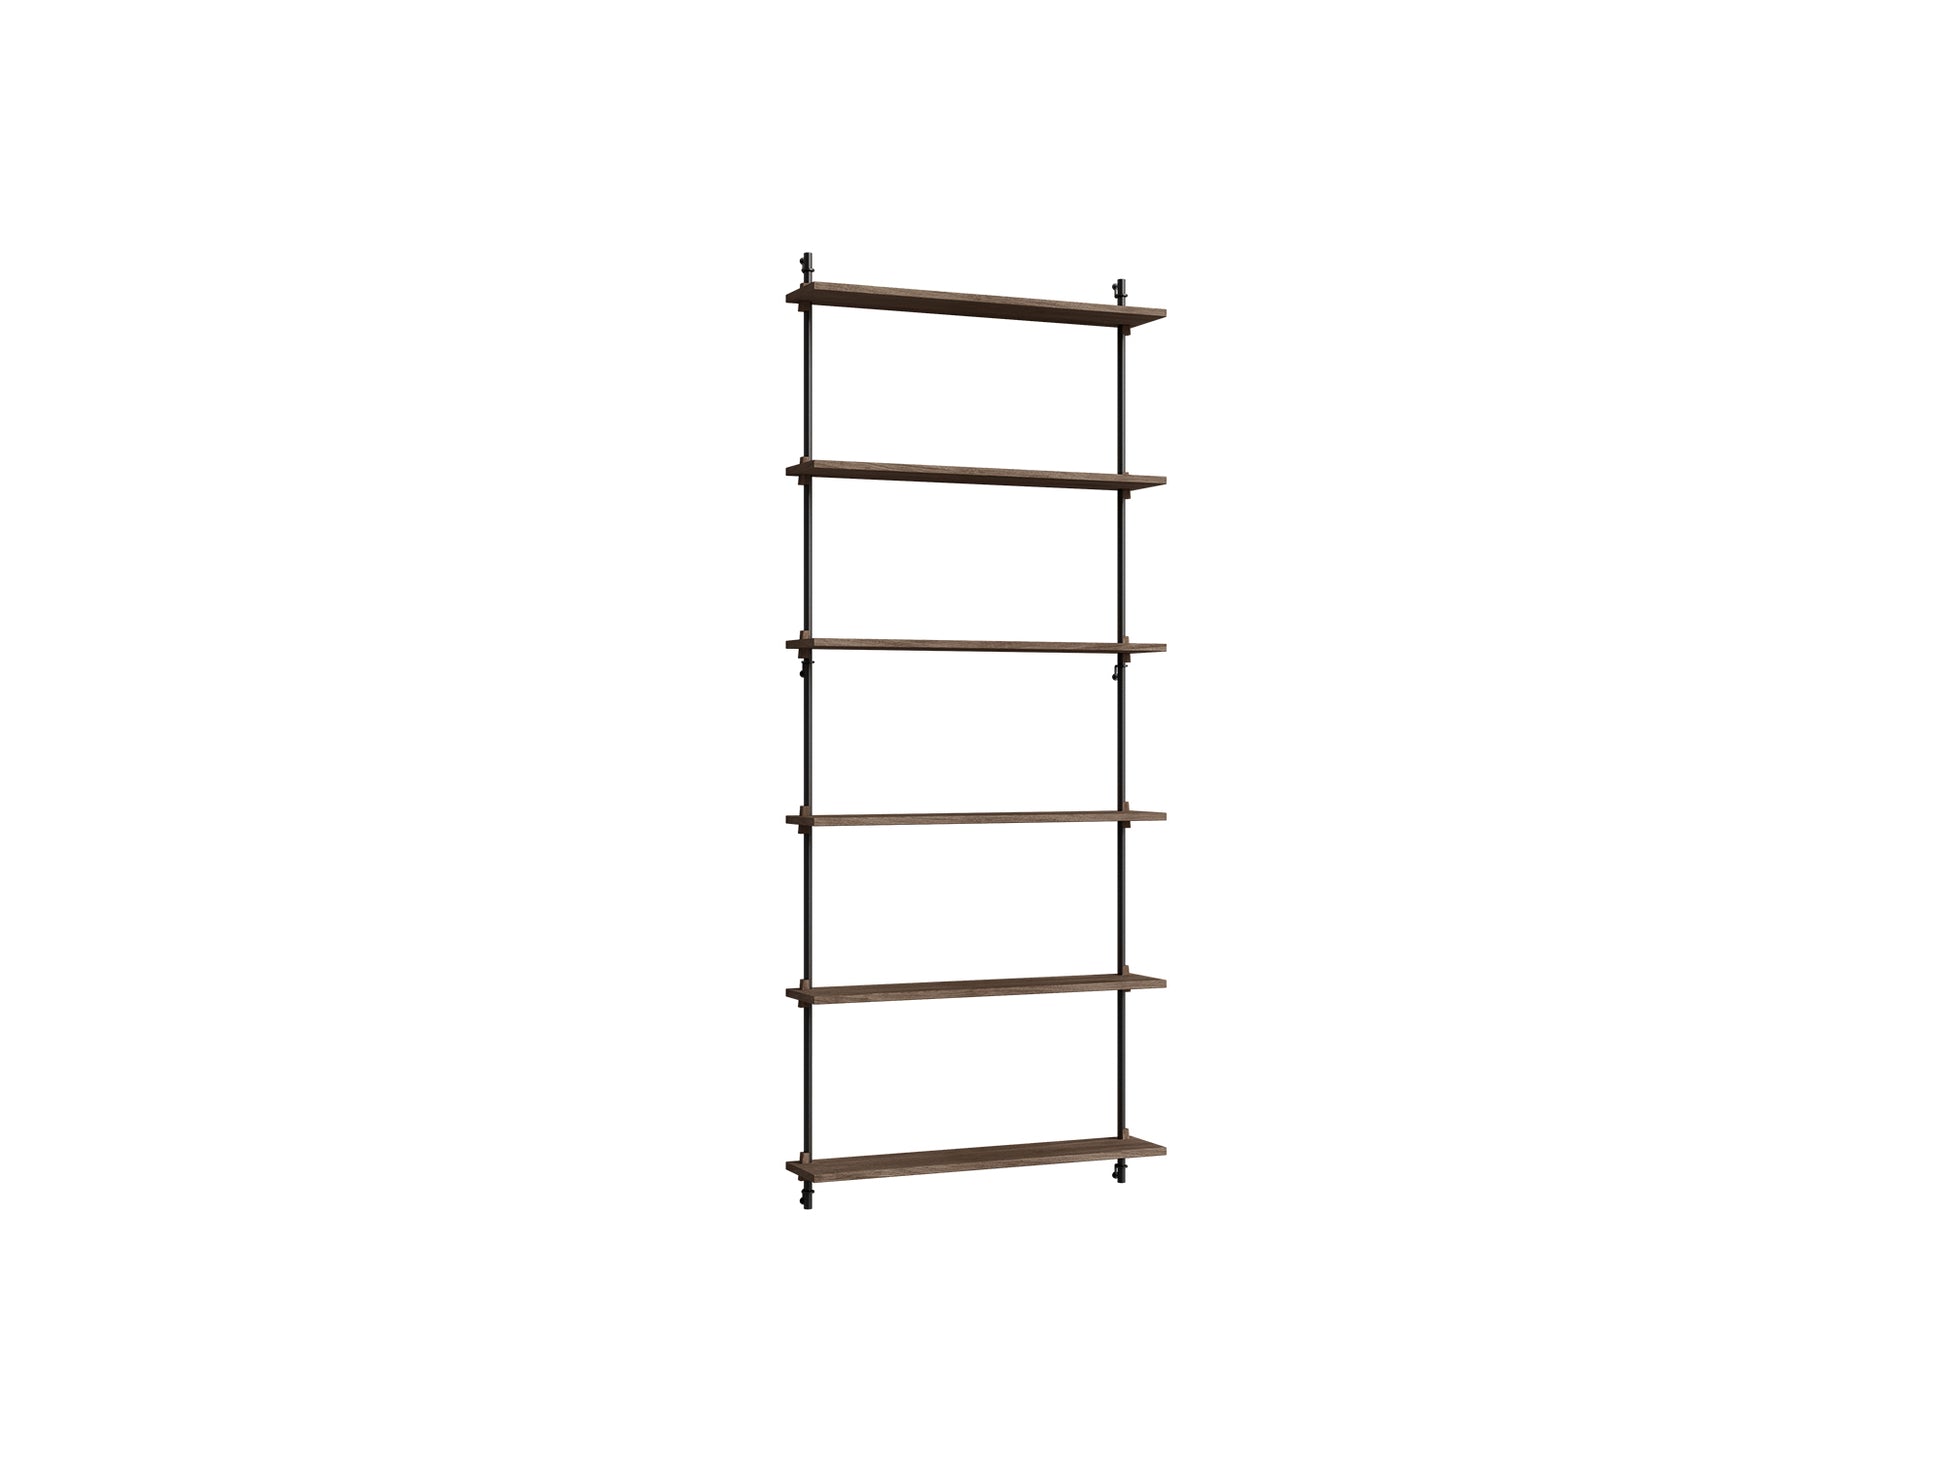 Wall Shelving System Sets (200 cm) by Moebe - WS.200.1 / Black Uprights / Smoked Oak